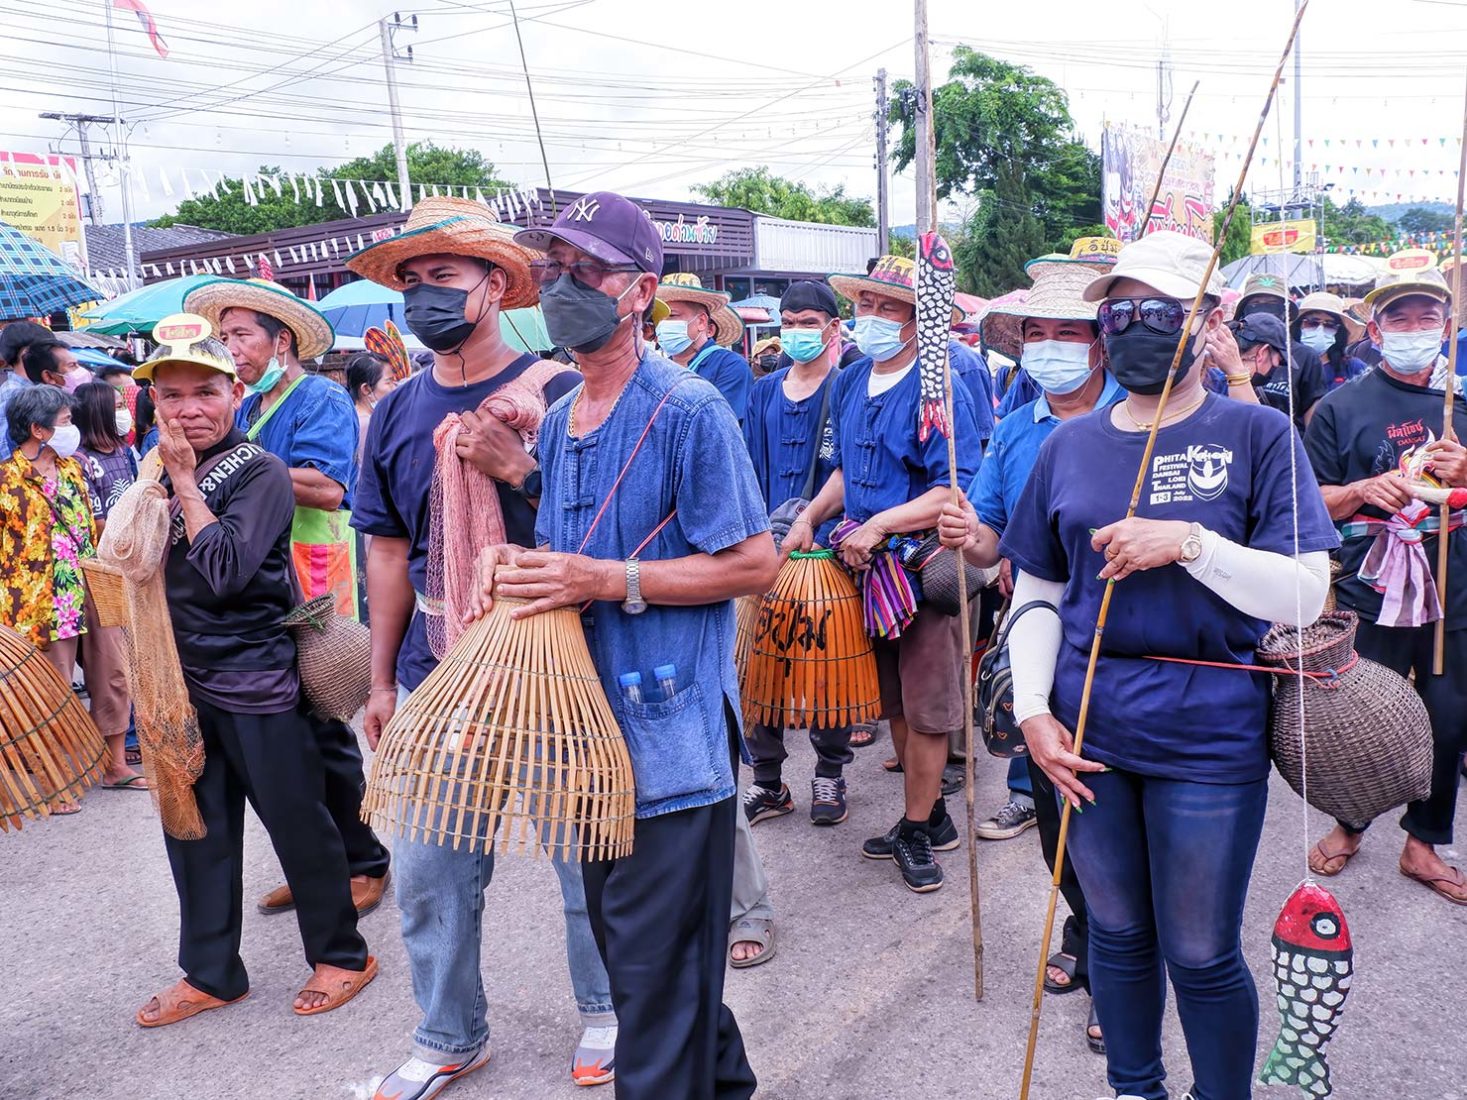 A group from one Tambon (district) in Loei wear traditional blue cotton Mor Hom attire and carry implements that represent their way of earning a living - chicken coop baskets and fishing poles